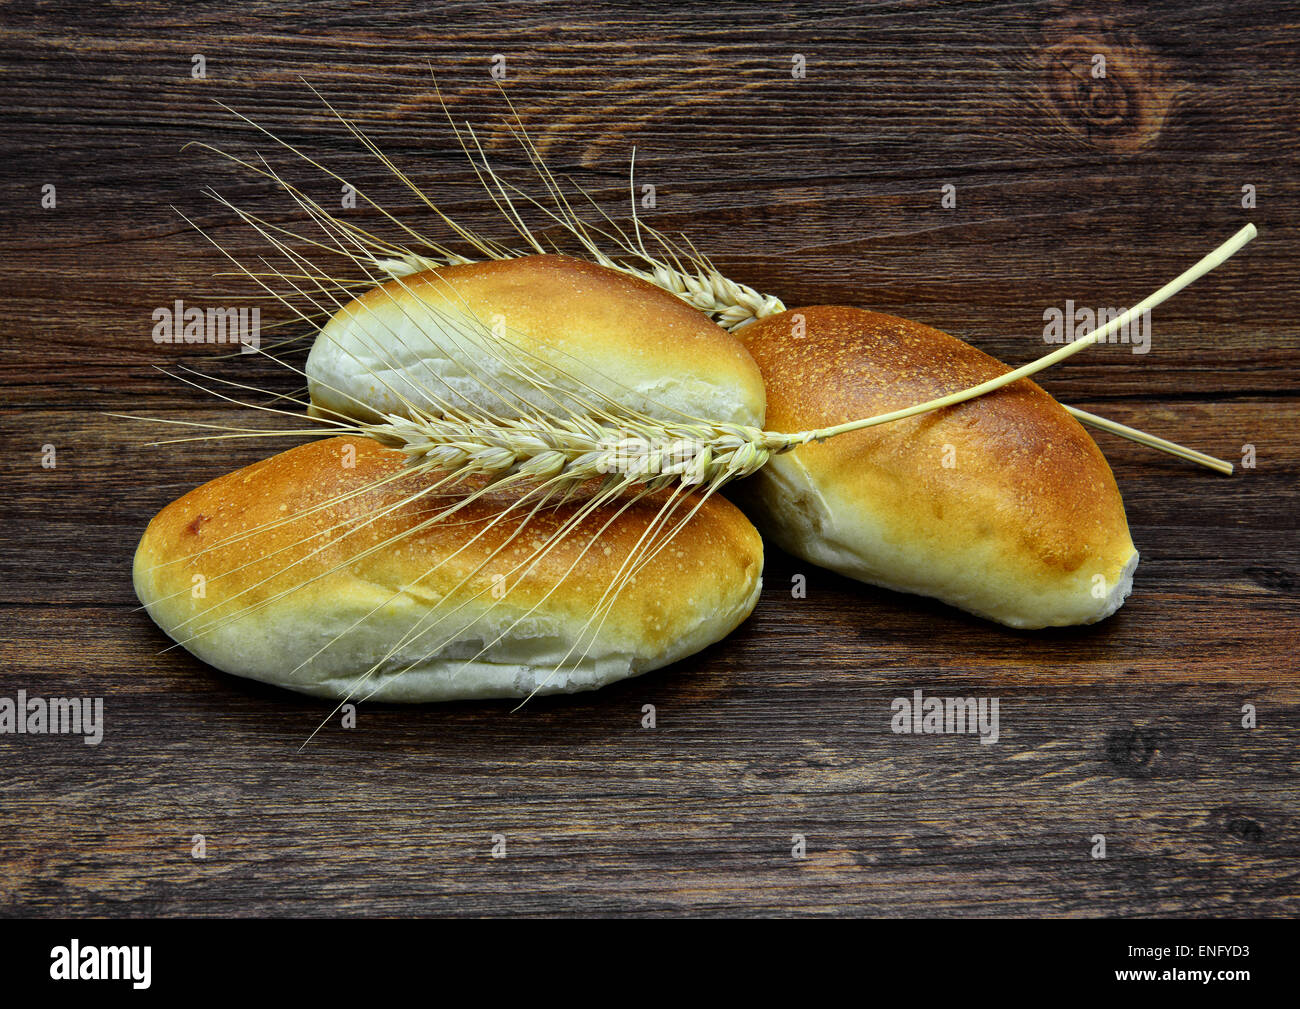 Homemade buns and ears on rustic wooden background. Stock Photo